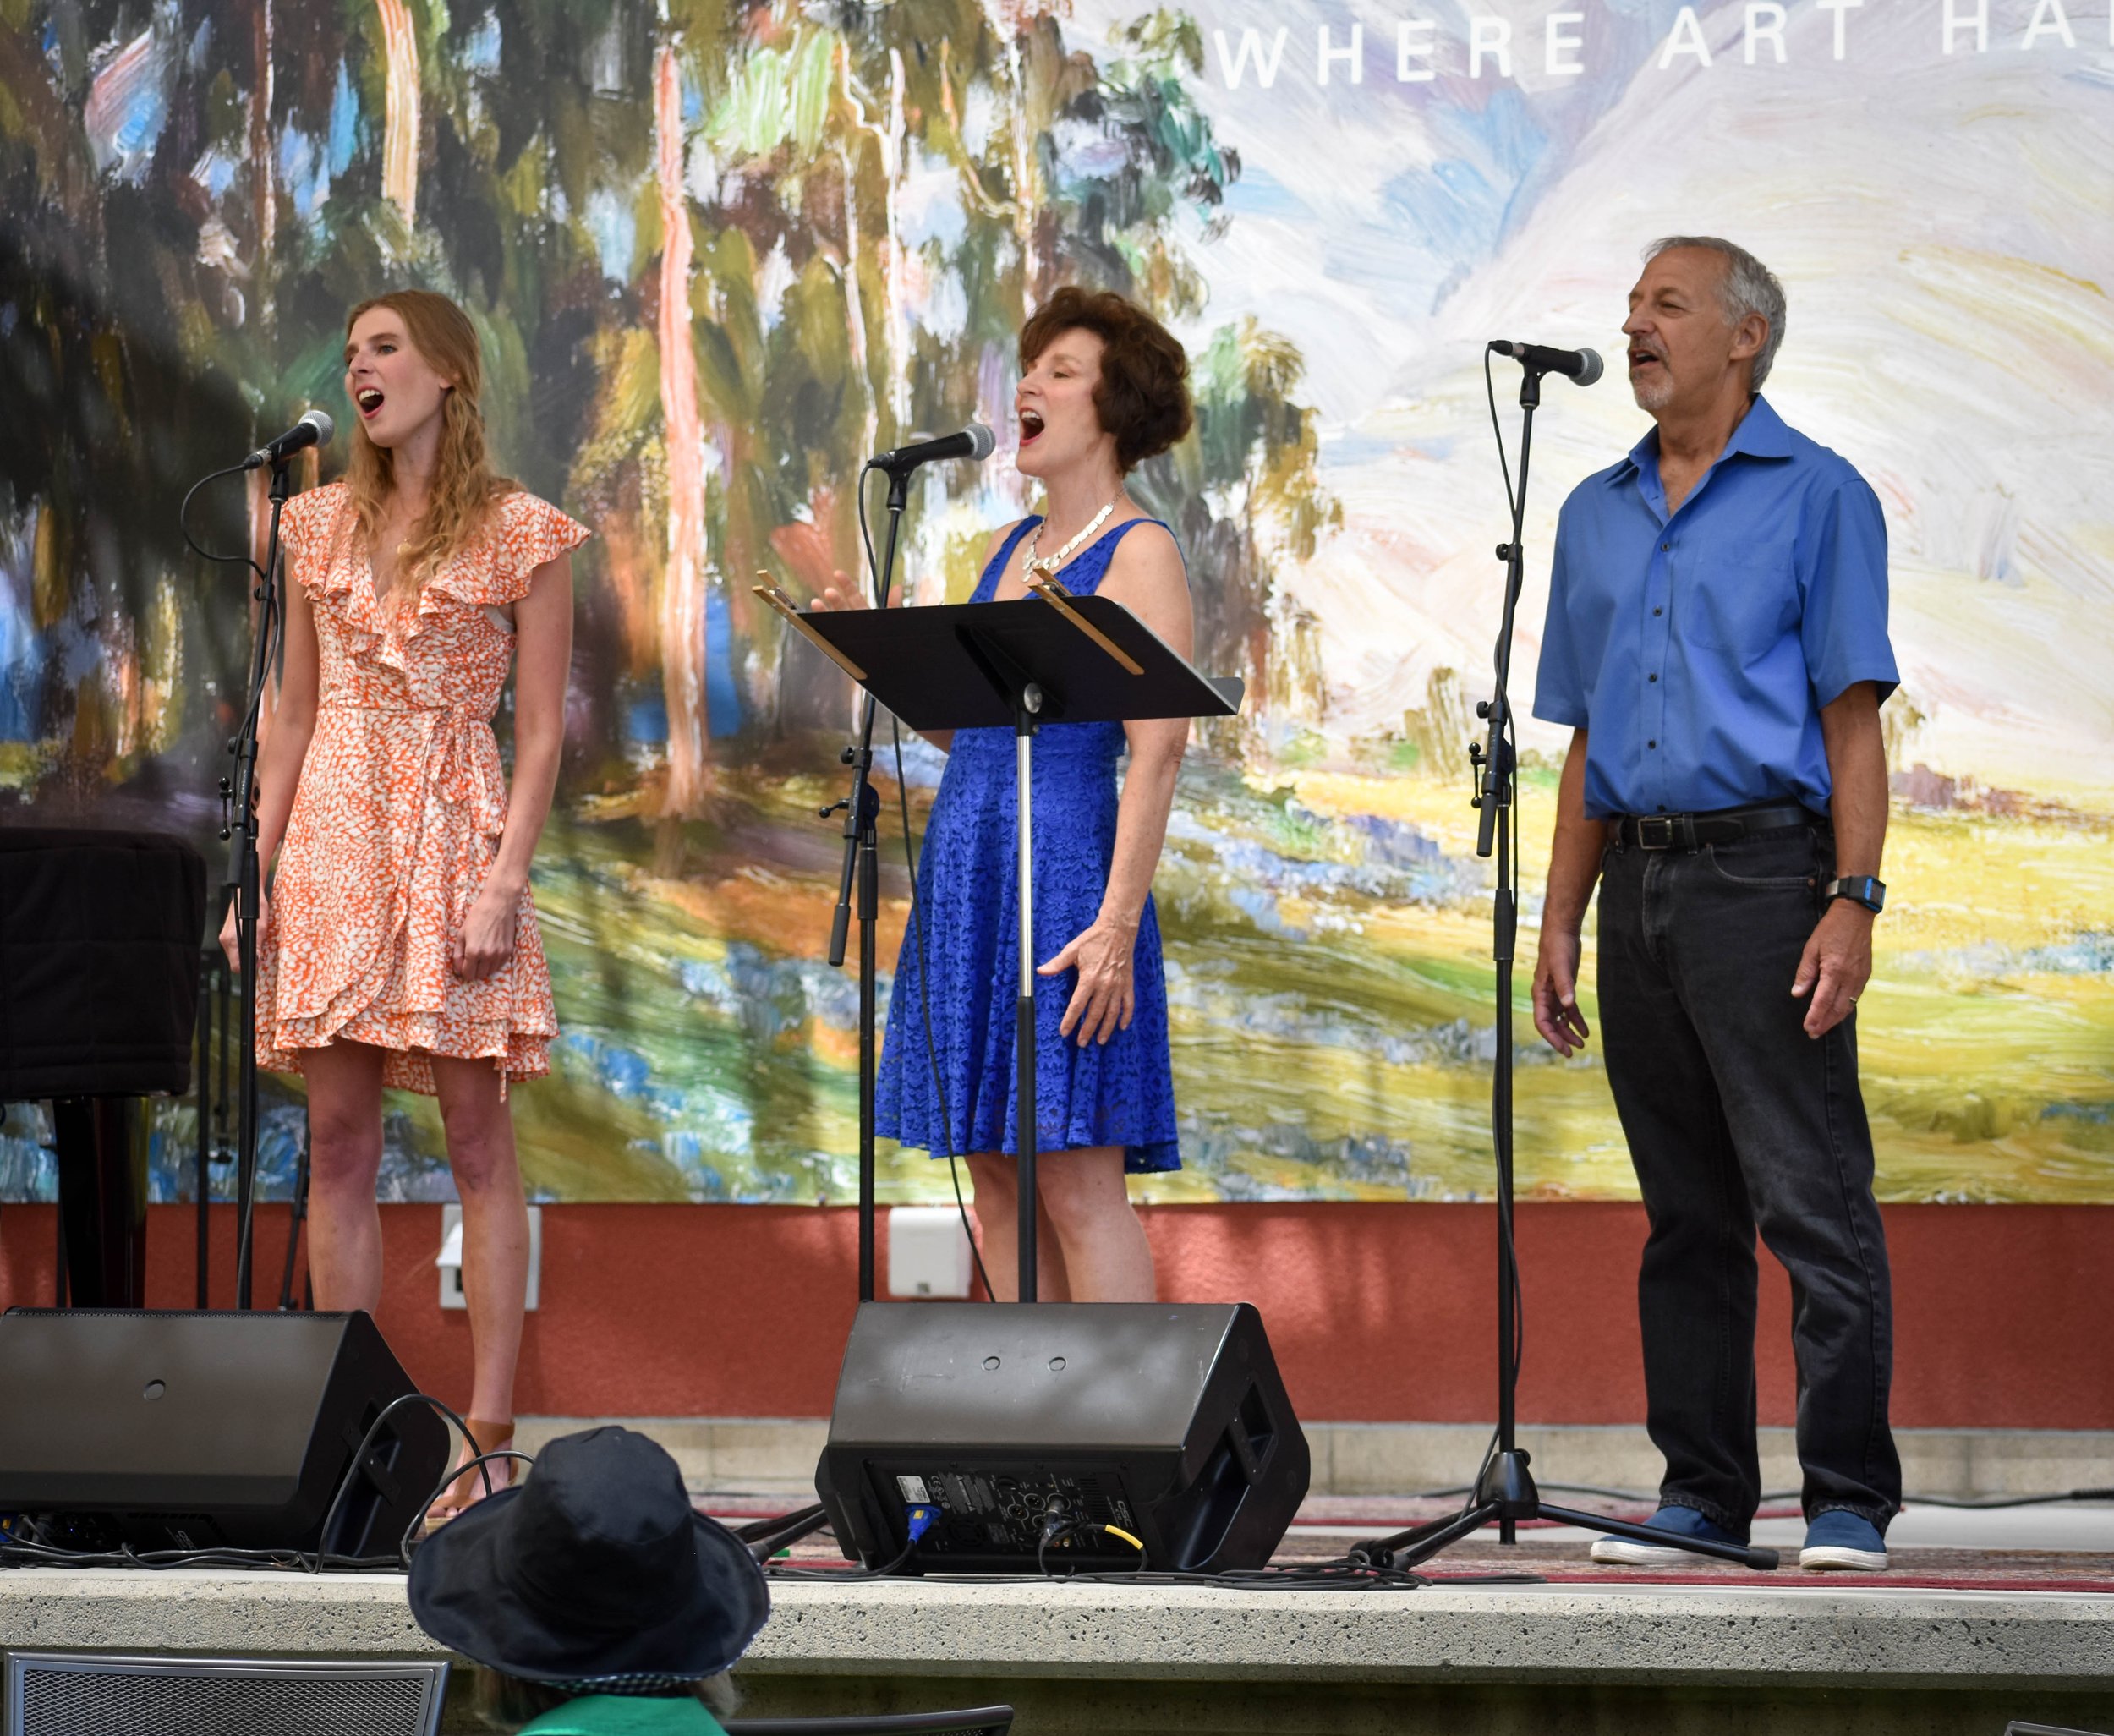 07-17-2022 LCCB Fest of Arts Summer Concert Series by Peyton Webster92-40.jpg